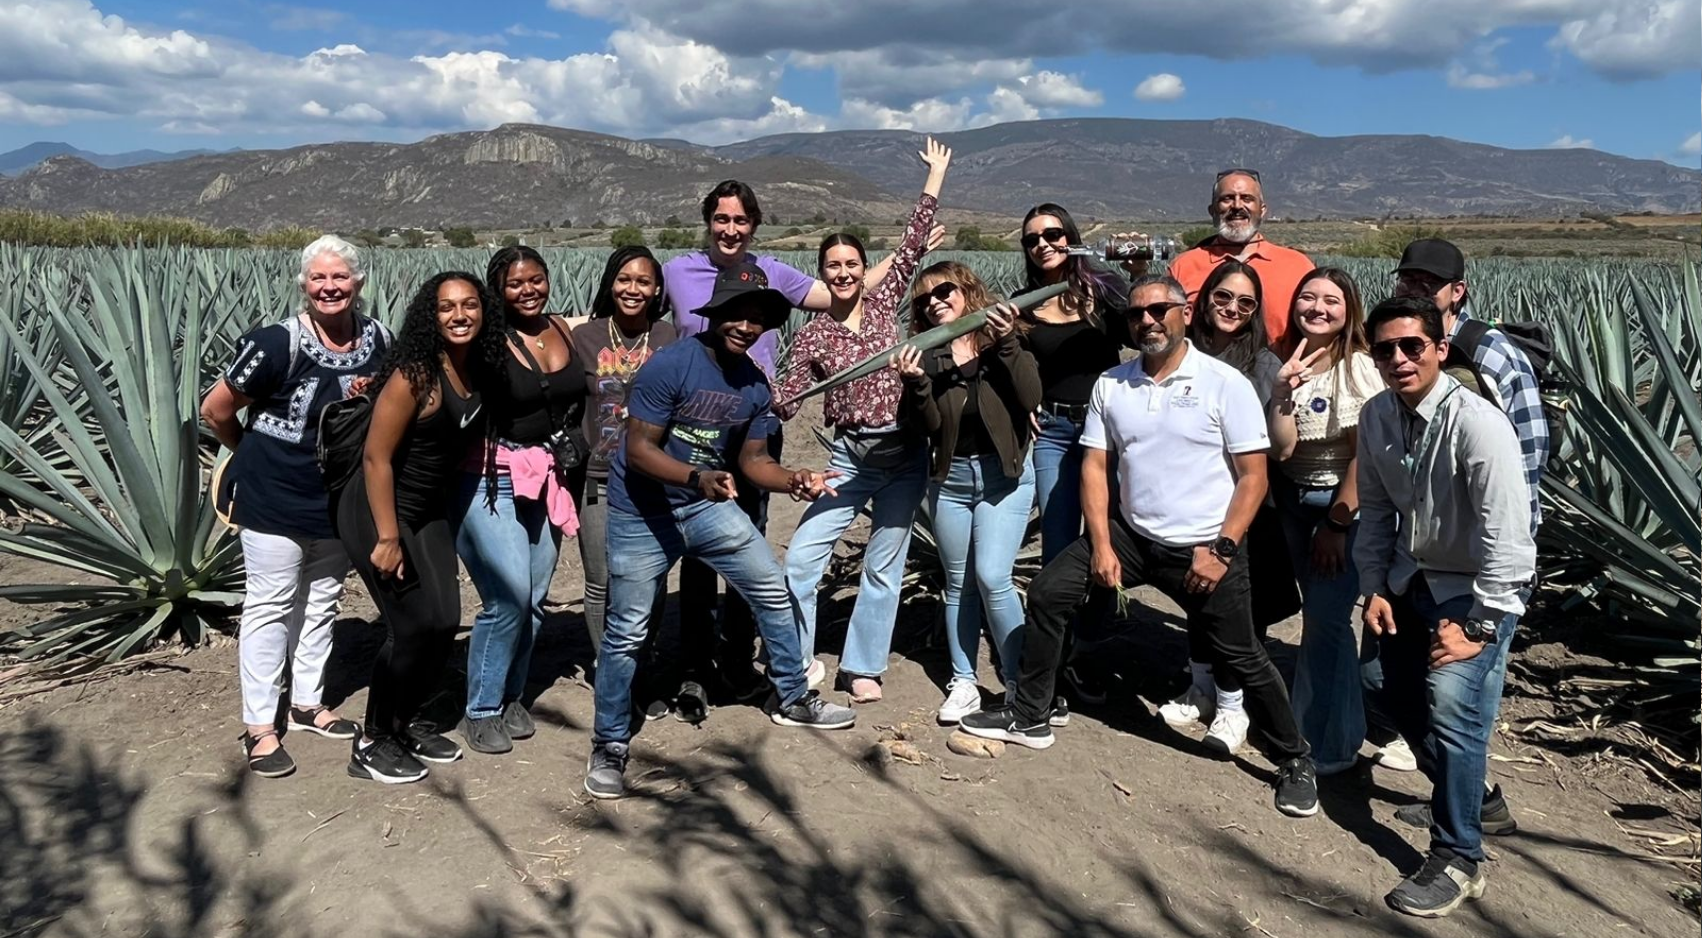 SDSU students learned about opportunities for research and about the university's binational collaboration with Mexico during their trip to the SDSU Oaxaca Center for Mesoamerican Studies. (SDSU)